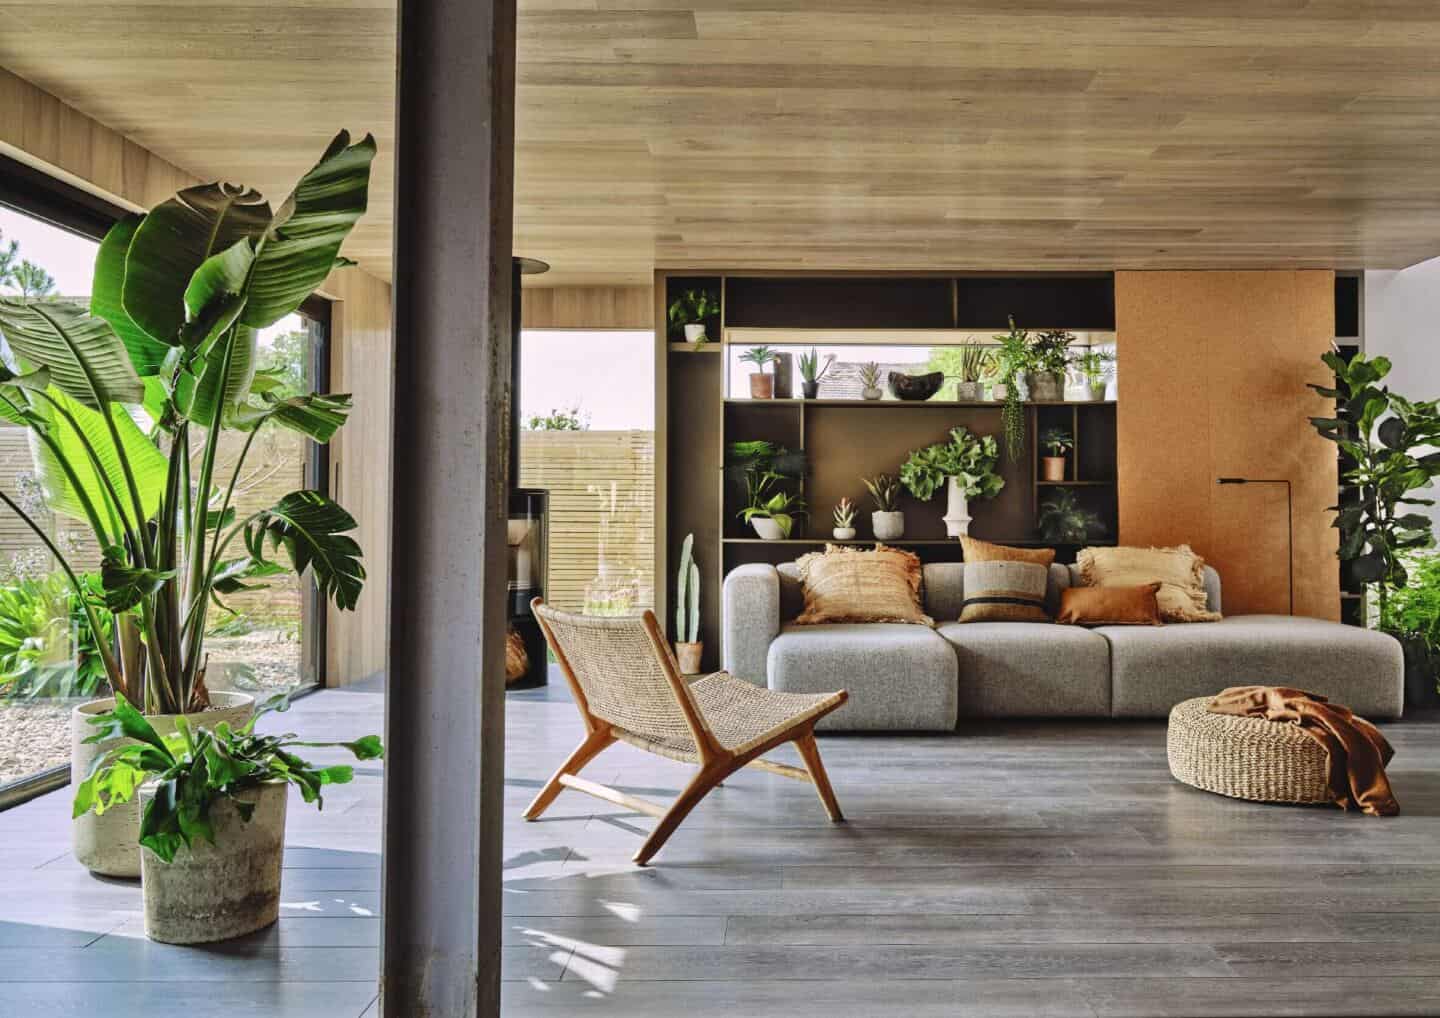 A living room full of natural materials and plants with floor to ceiling windows